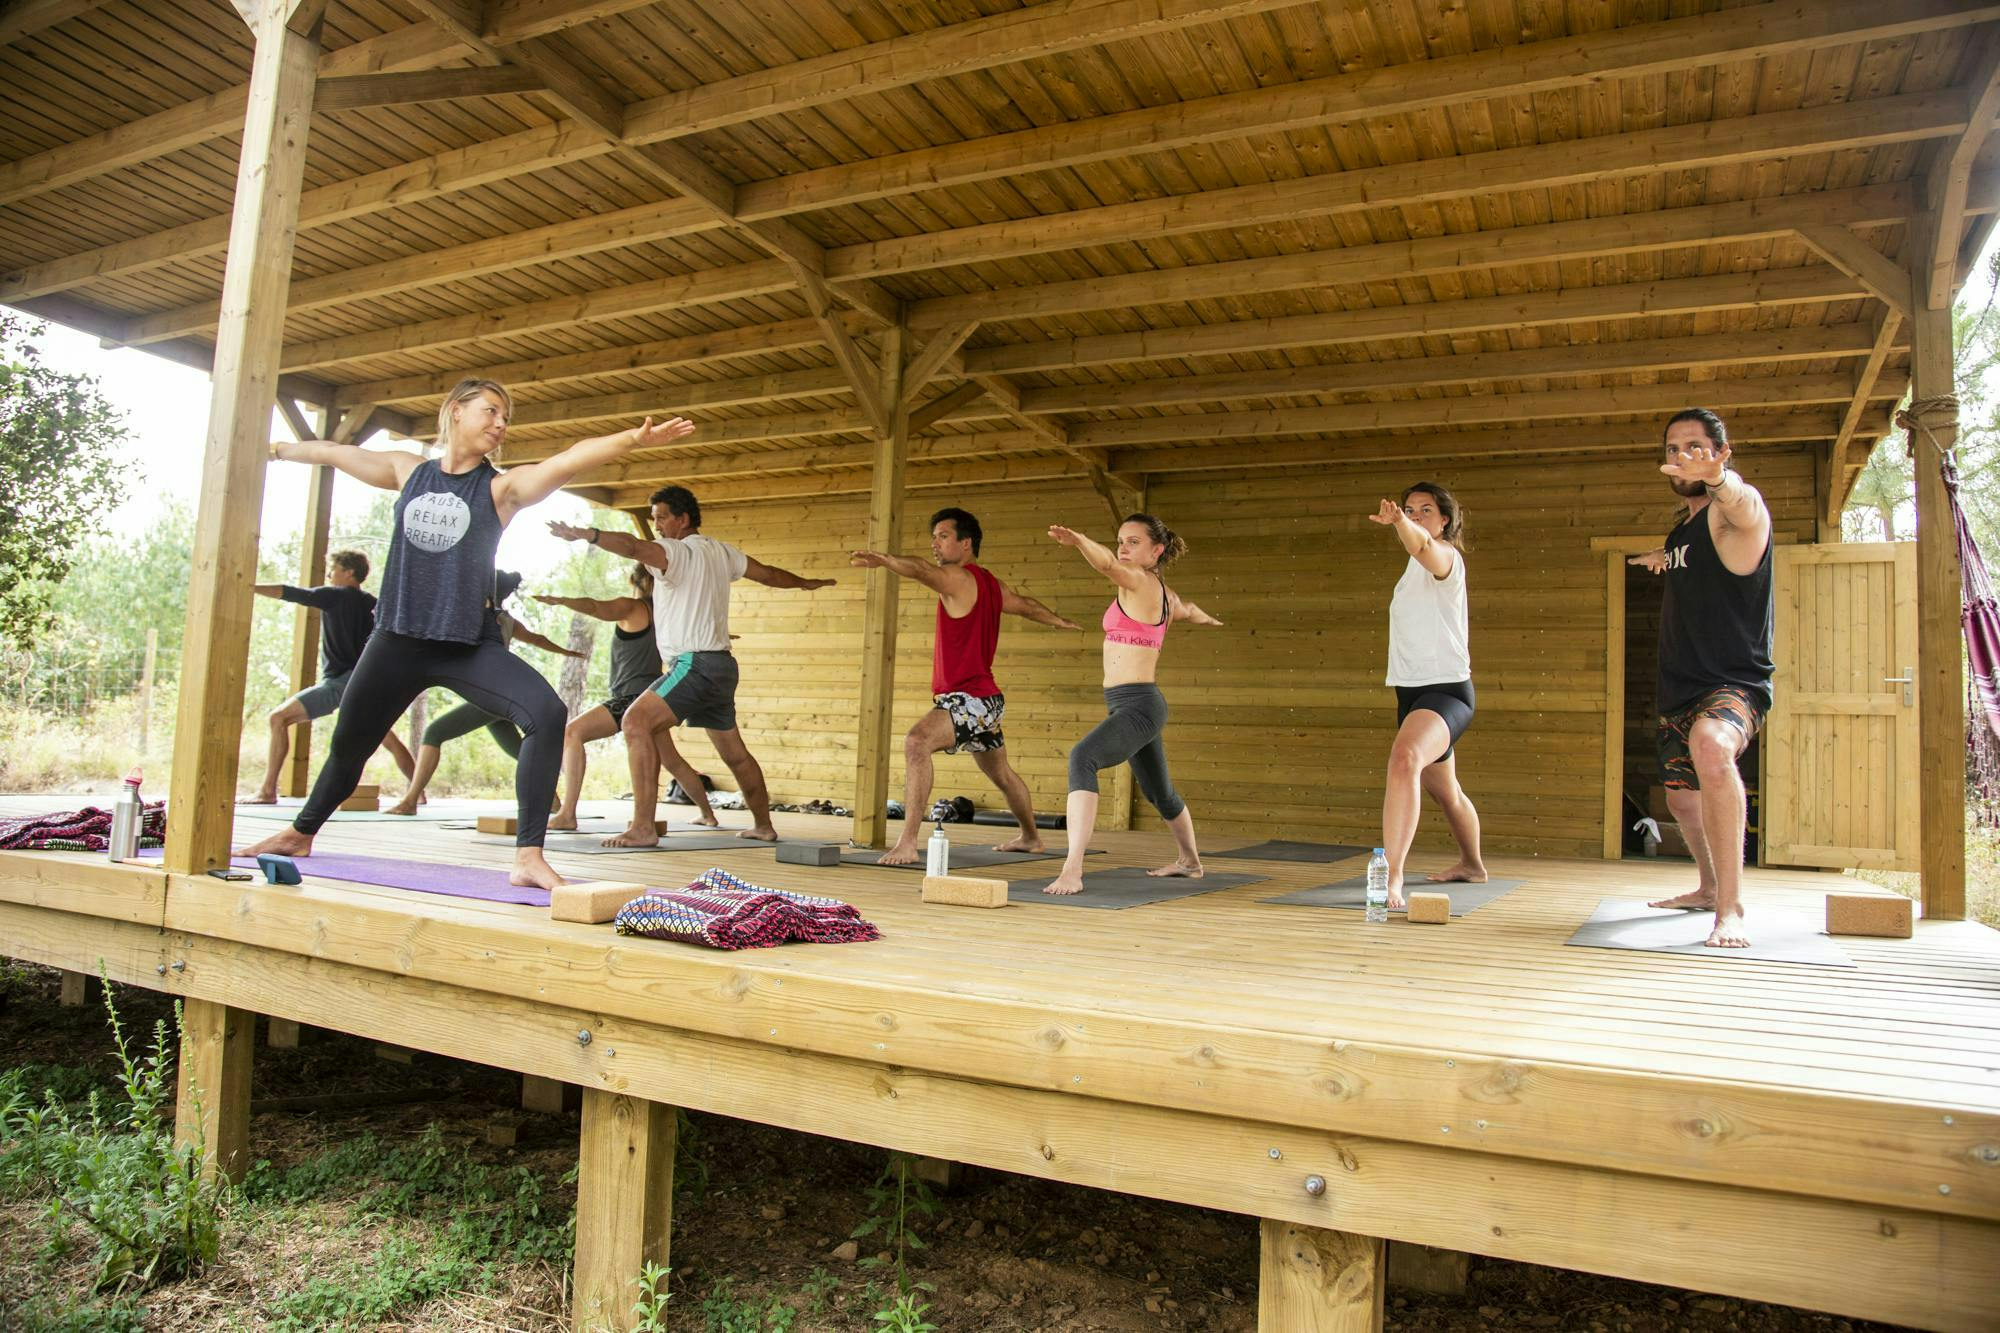 A female Caucasian yoga instructor guides 8 yogi students through a series of poses in an open air, outdoor shala in the woods.